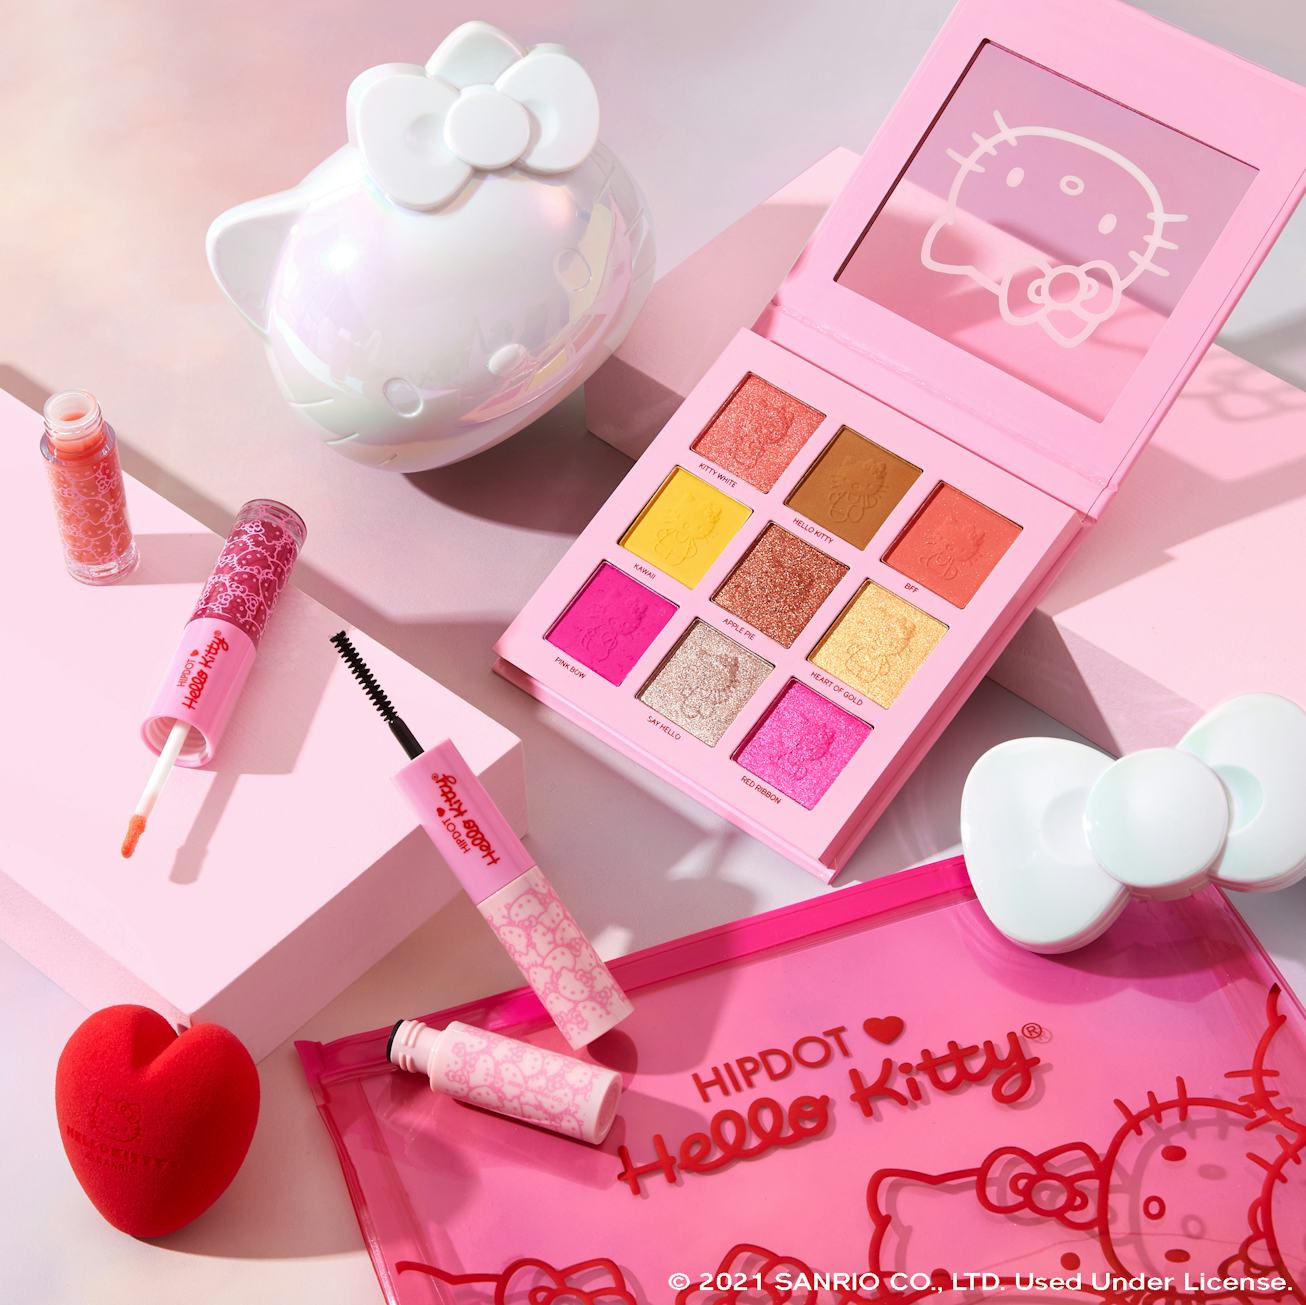 HipDot Hello Kitty products, including an eyeshadow palette and mascara, are laid out on a white bac...